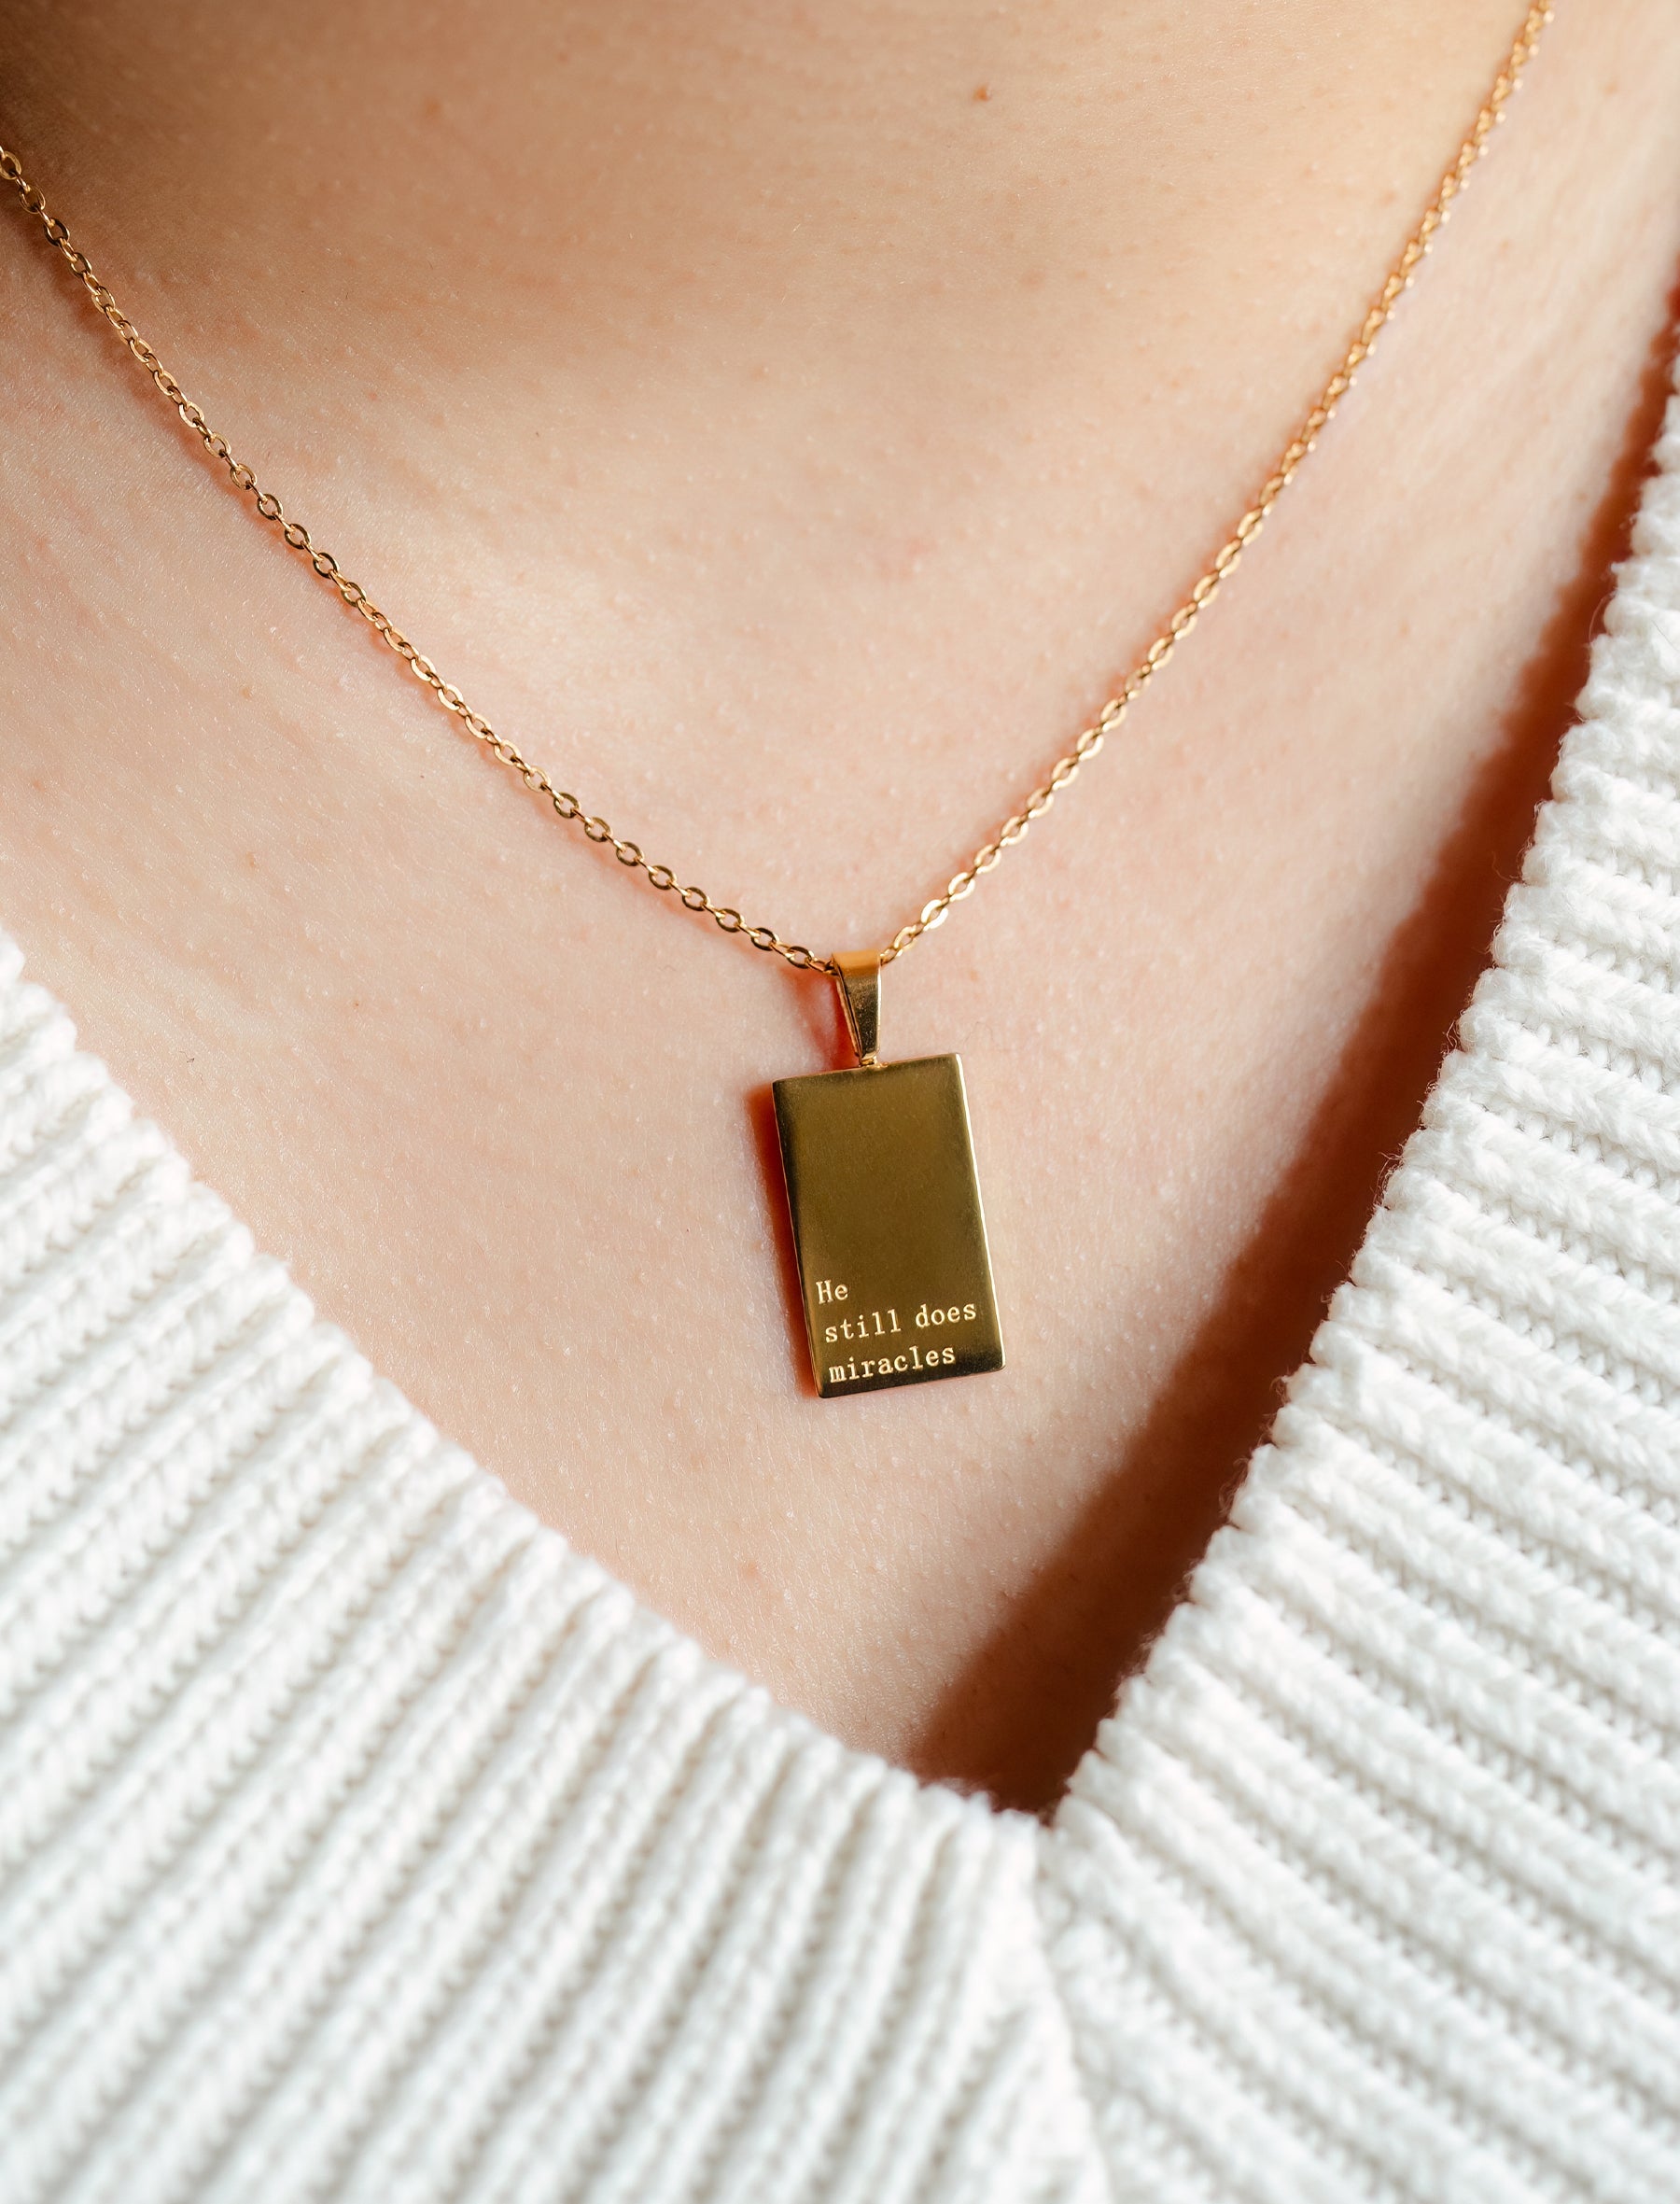 Necklace: 18kt Gold He still does miracles